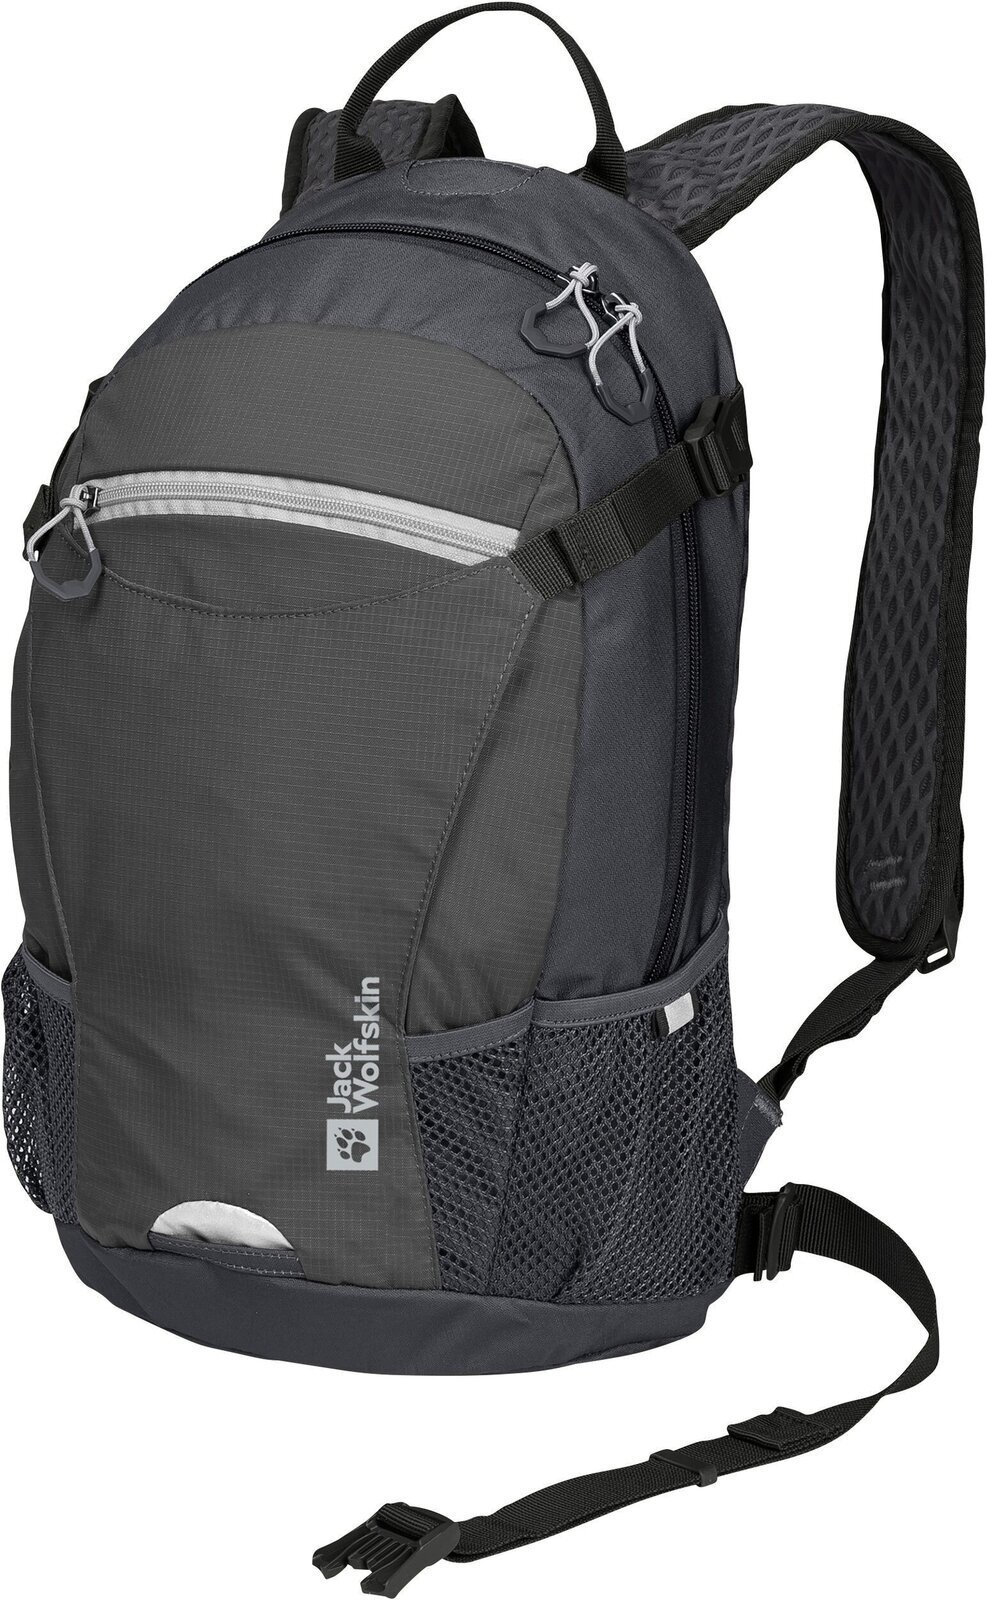 Cycling backpack and accessories Jack Wolfskin Velocity 12 Slate Backpack